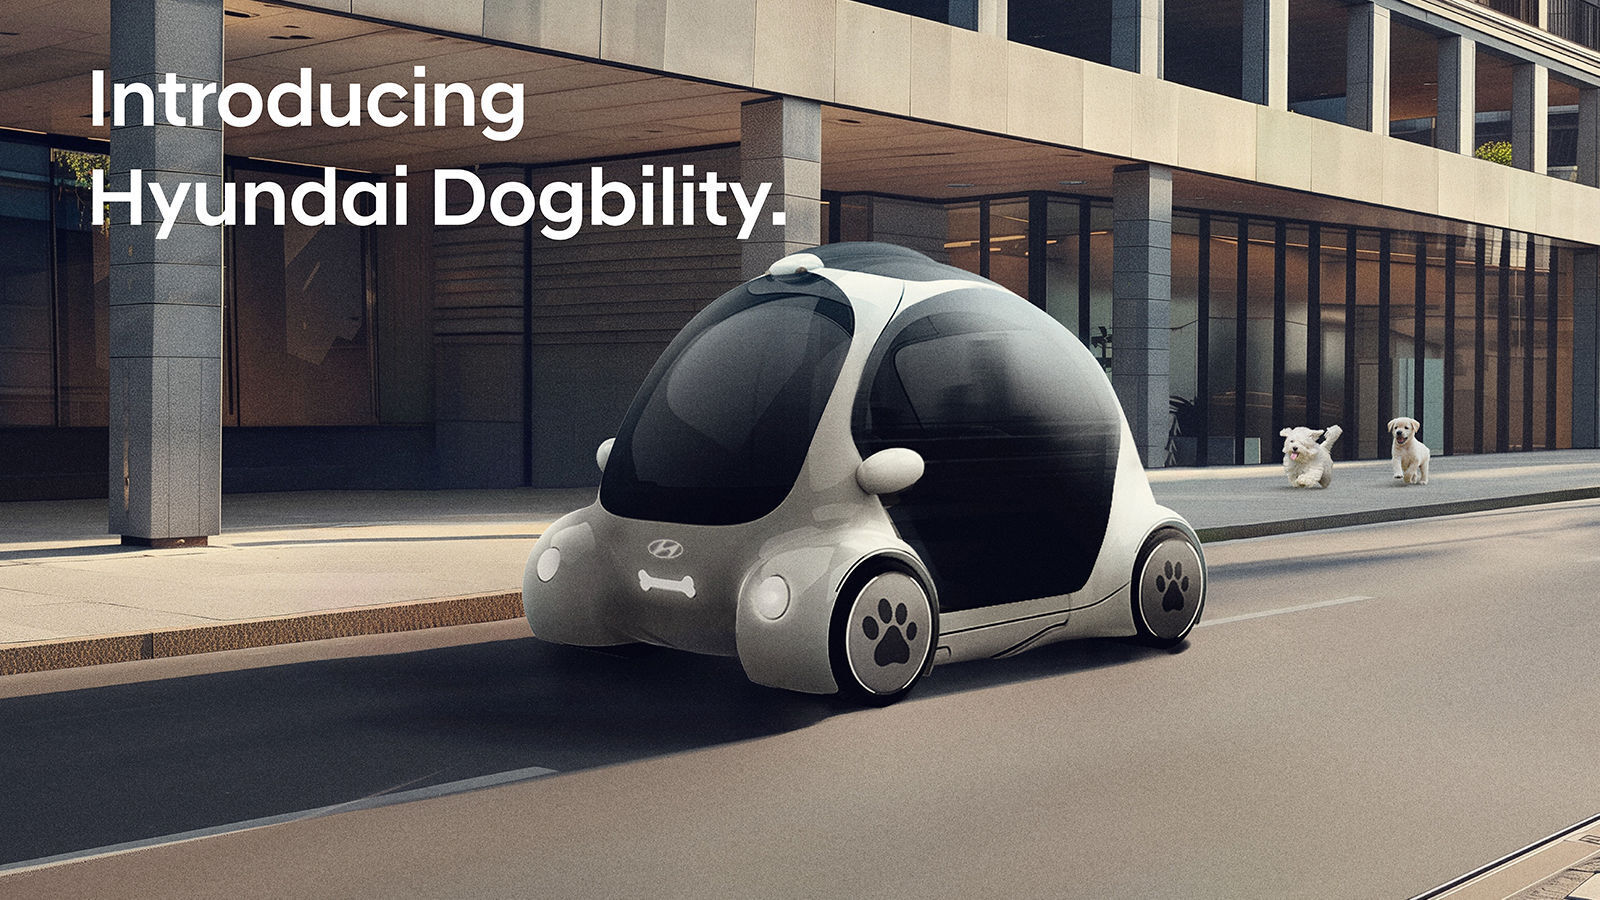 Hyundai Motor’s ‘Dogbility’ Campaign Fetches Laughs and Sparks Conversations About Universal Mobility